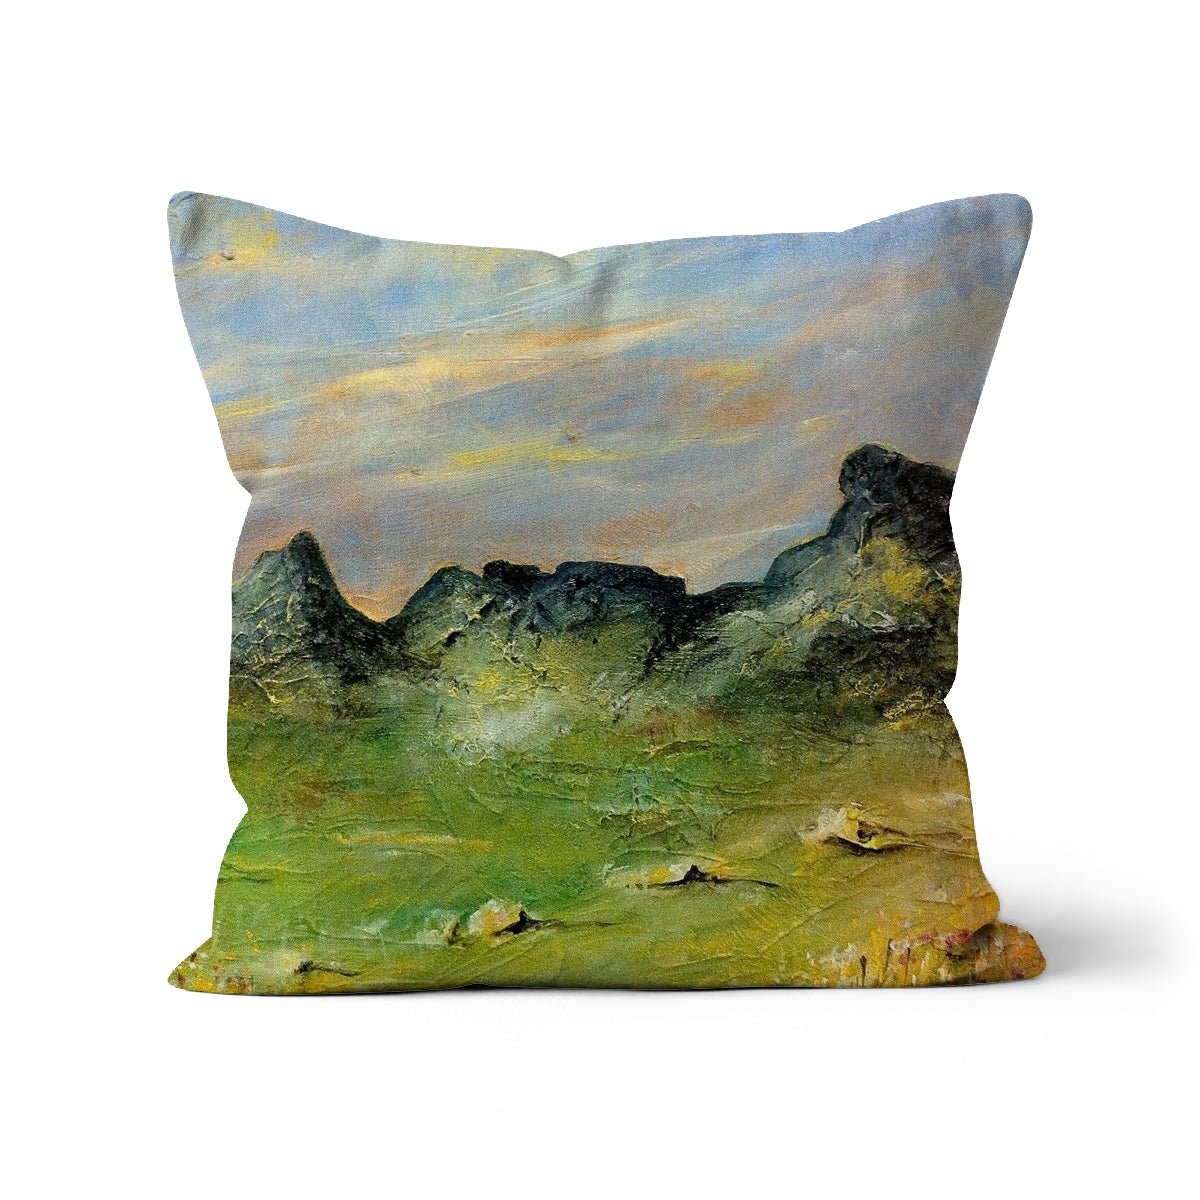 The Cobbler Art Gifts Cushion-Cushions-Scottish Lochs & Mountains Art Gallery-Canvas-12"x12"-Paintings, Prints, Homeware, Art Gifts From Scotland By Scottish Artist Kevin Hunter